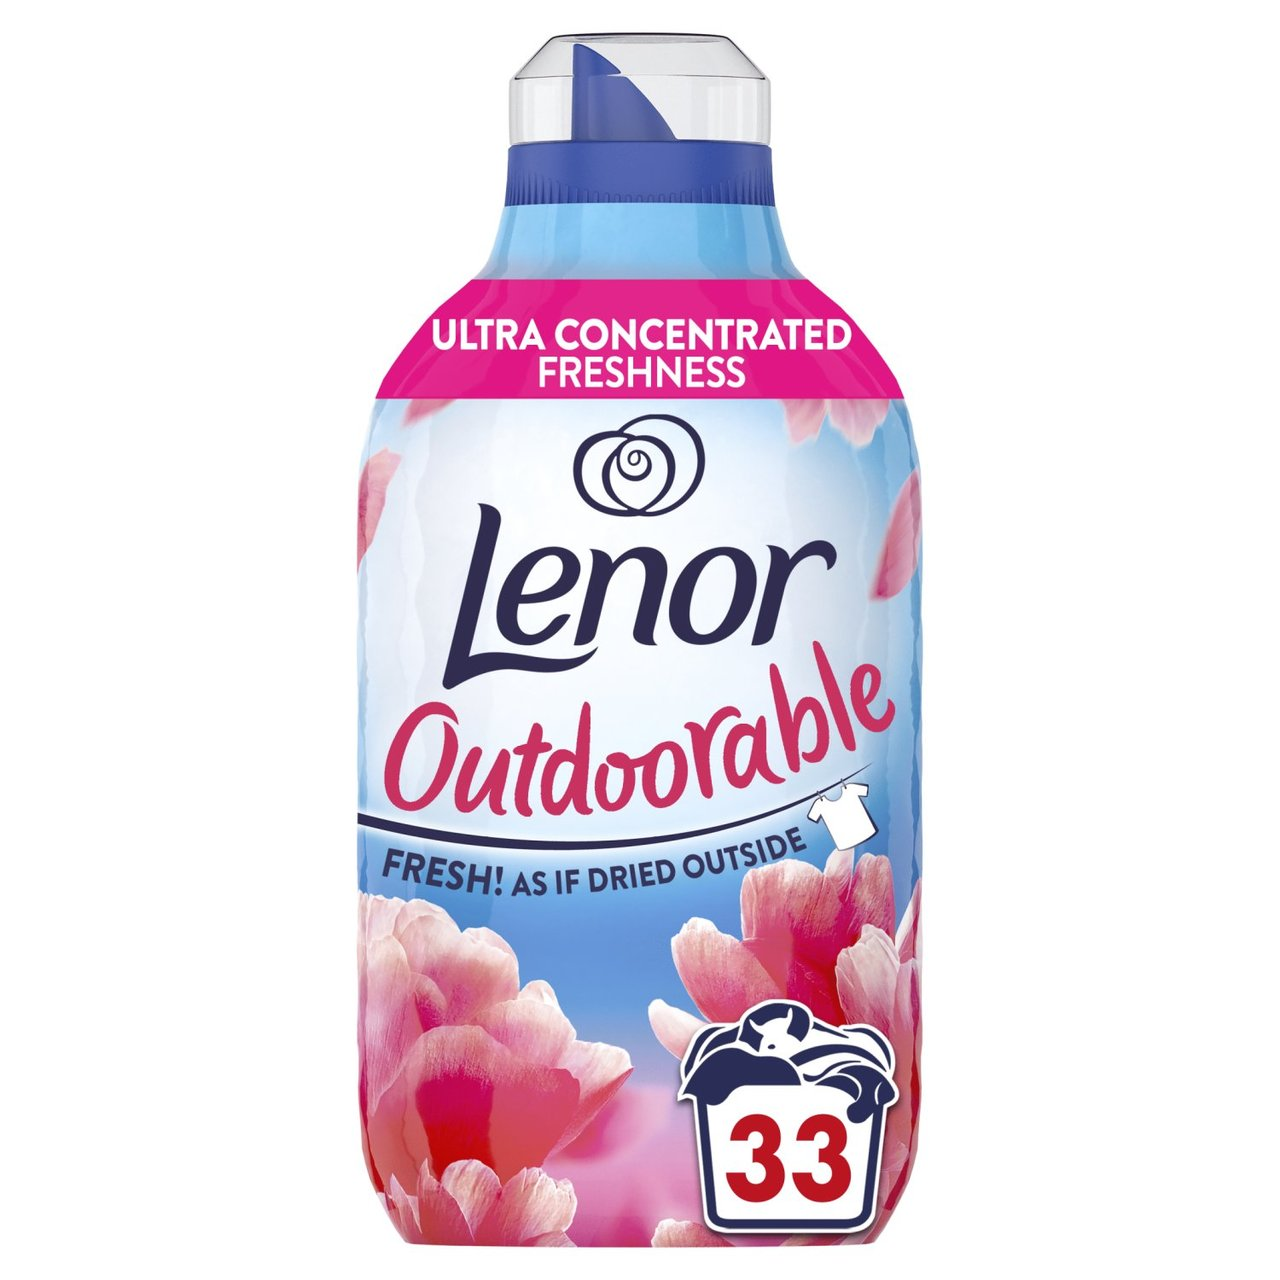 Lenor Outdoorable Fabric Conditioner Pink Blossom 33 Washes, 462ml